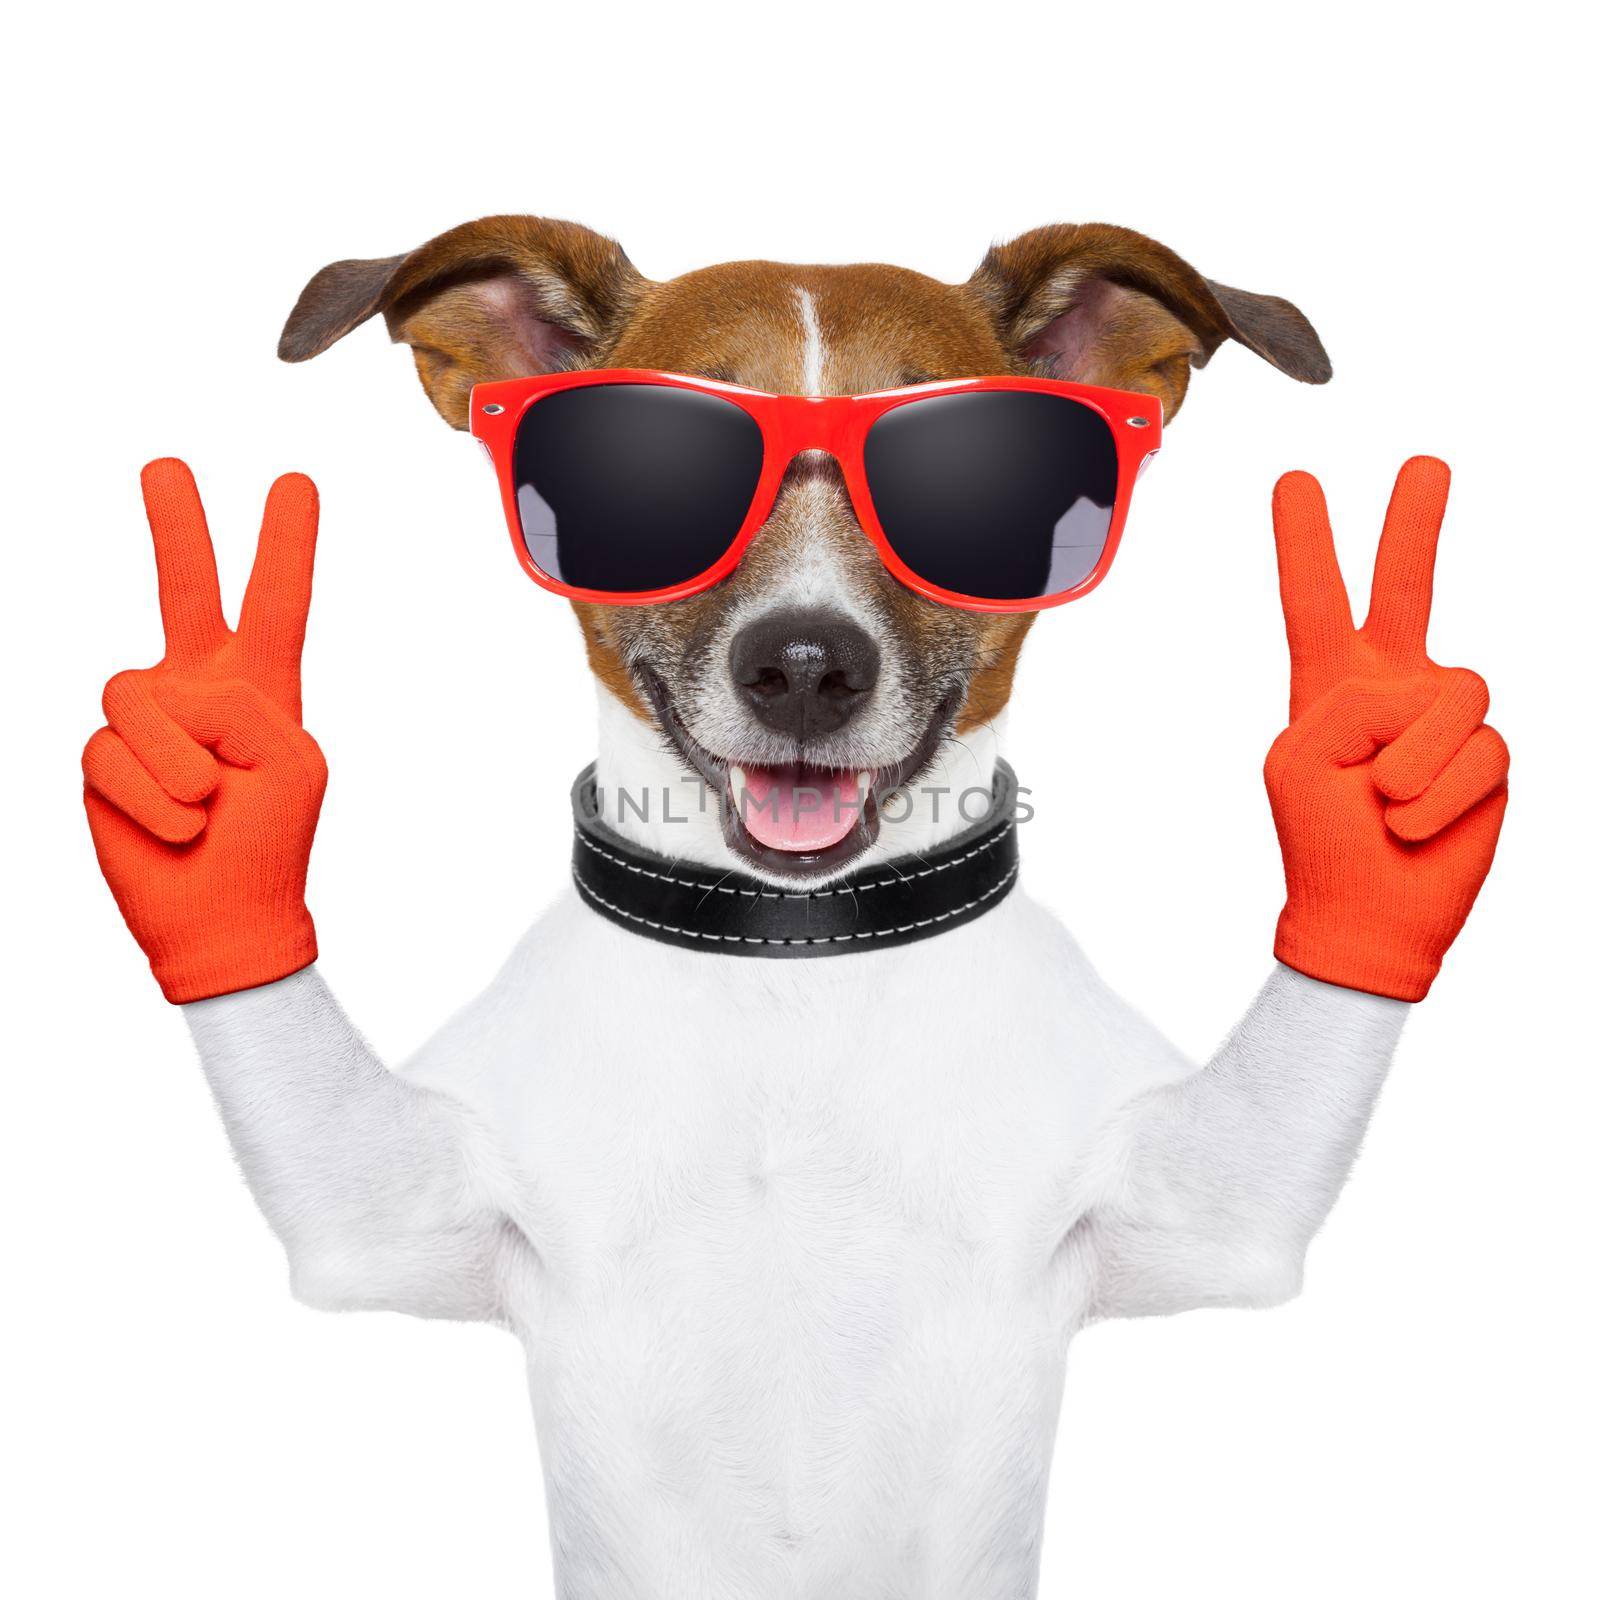 peace and victory fingers dog with red gloves and glasses